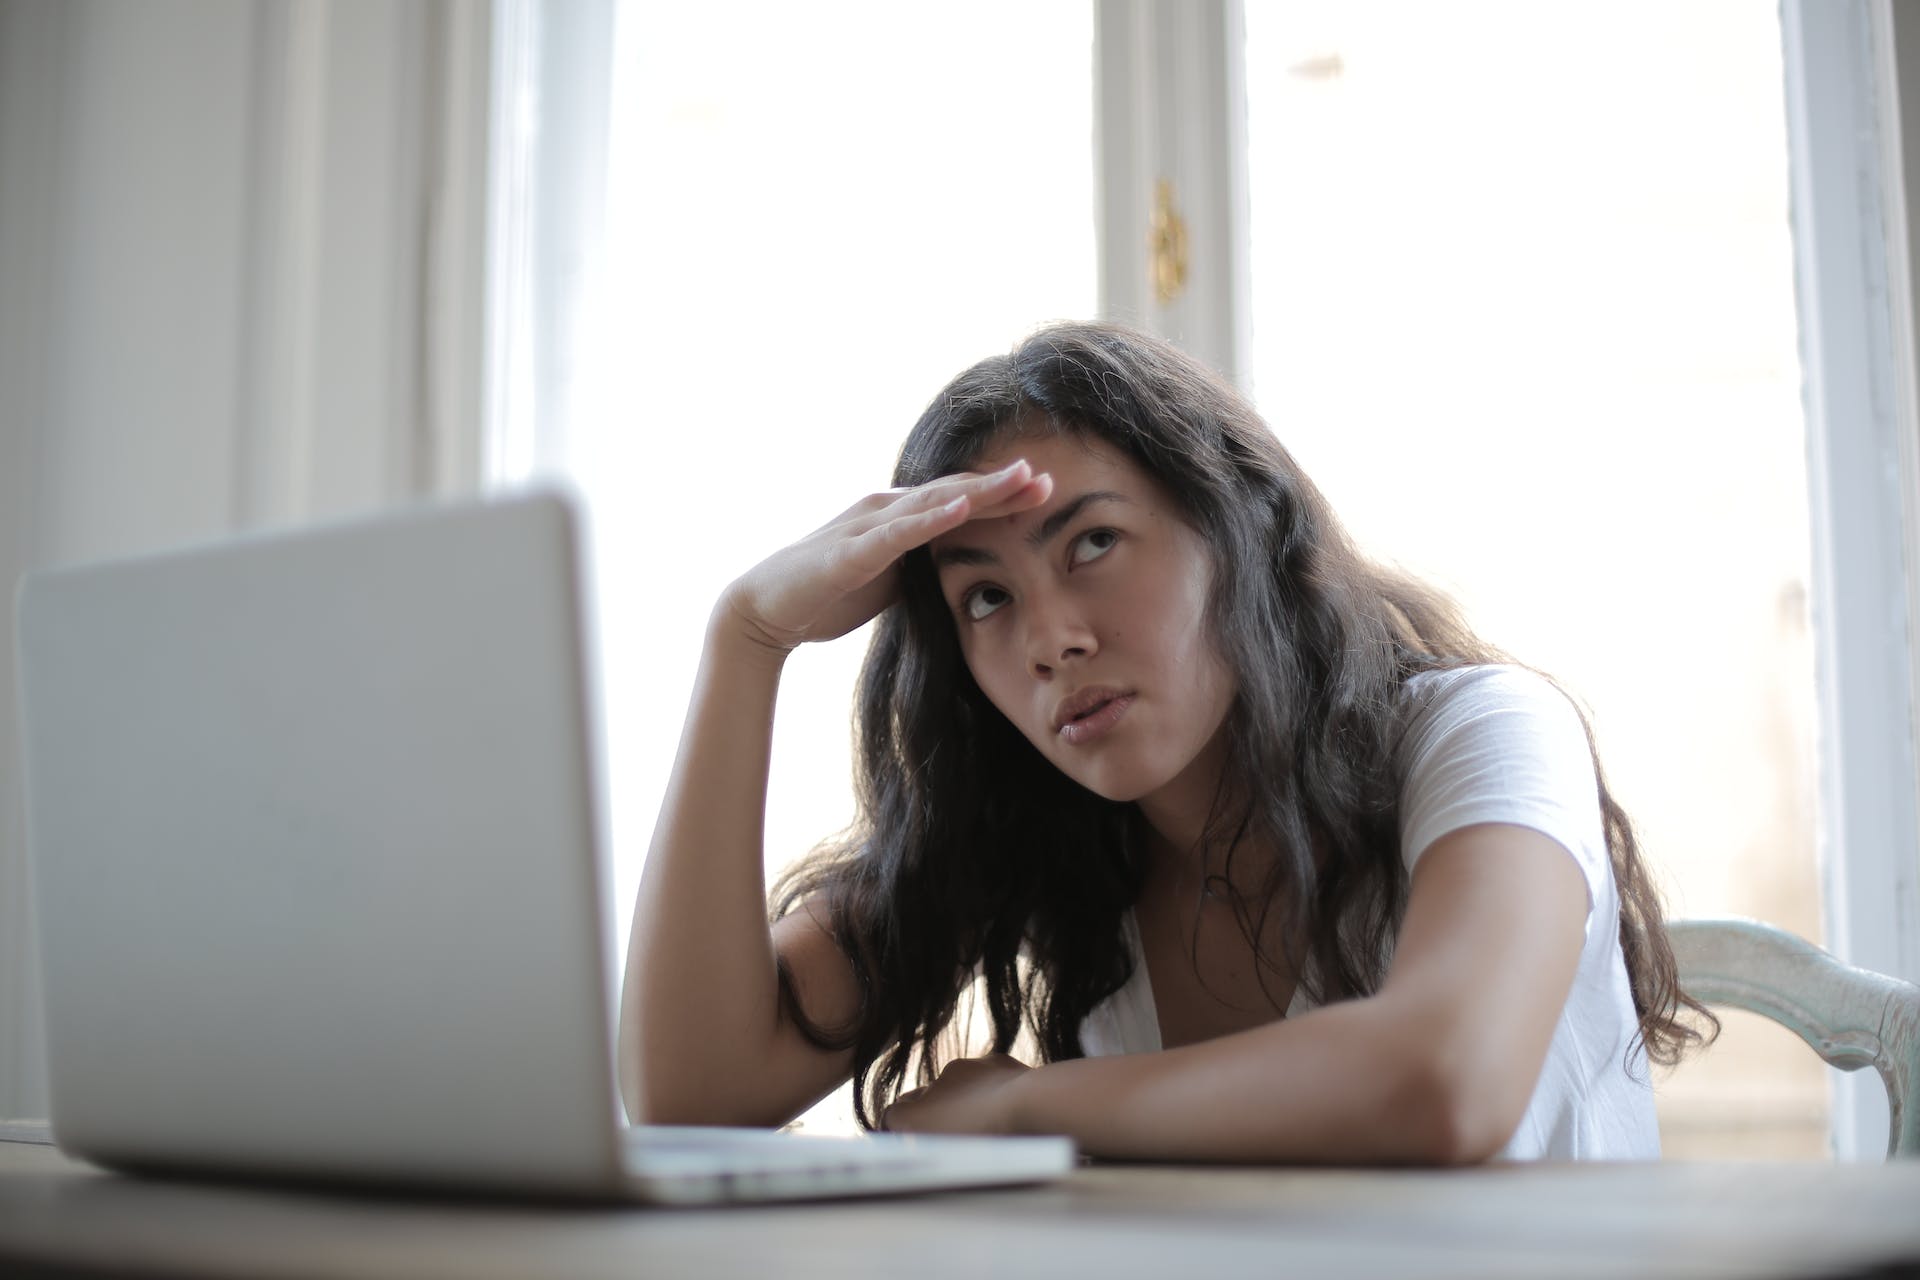 An annoyed woman sitting in front of a laptop | Source: Pexels